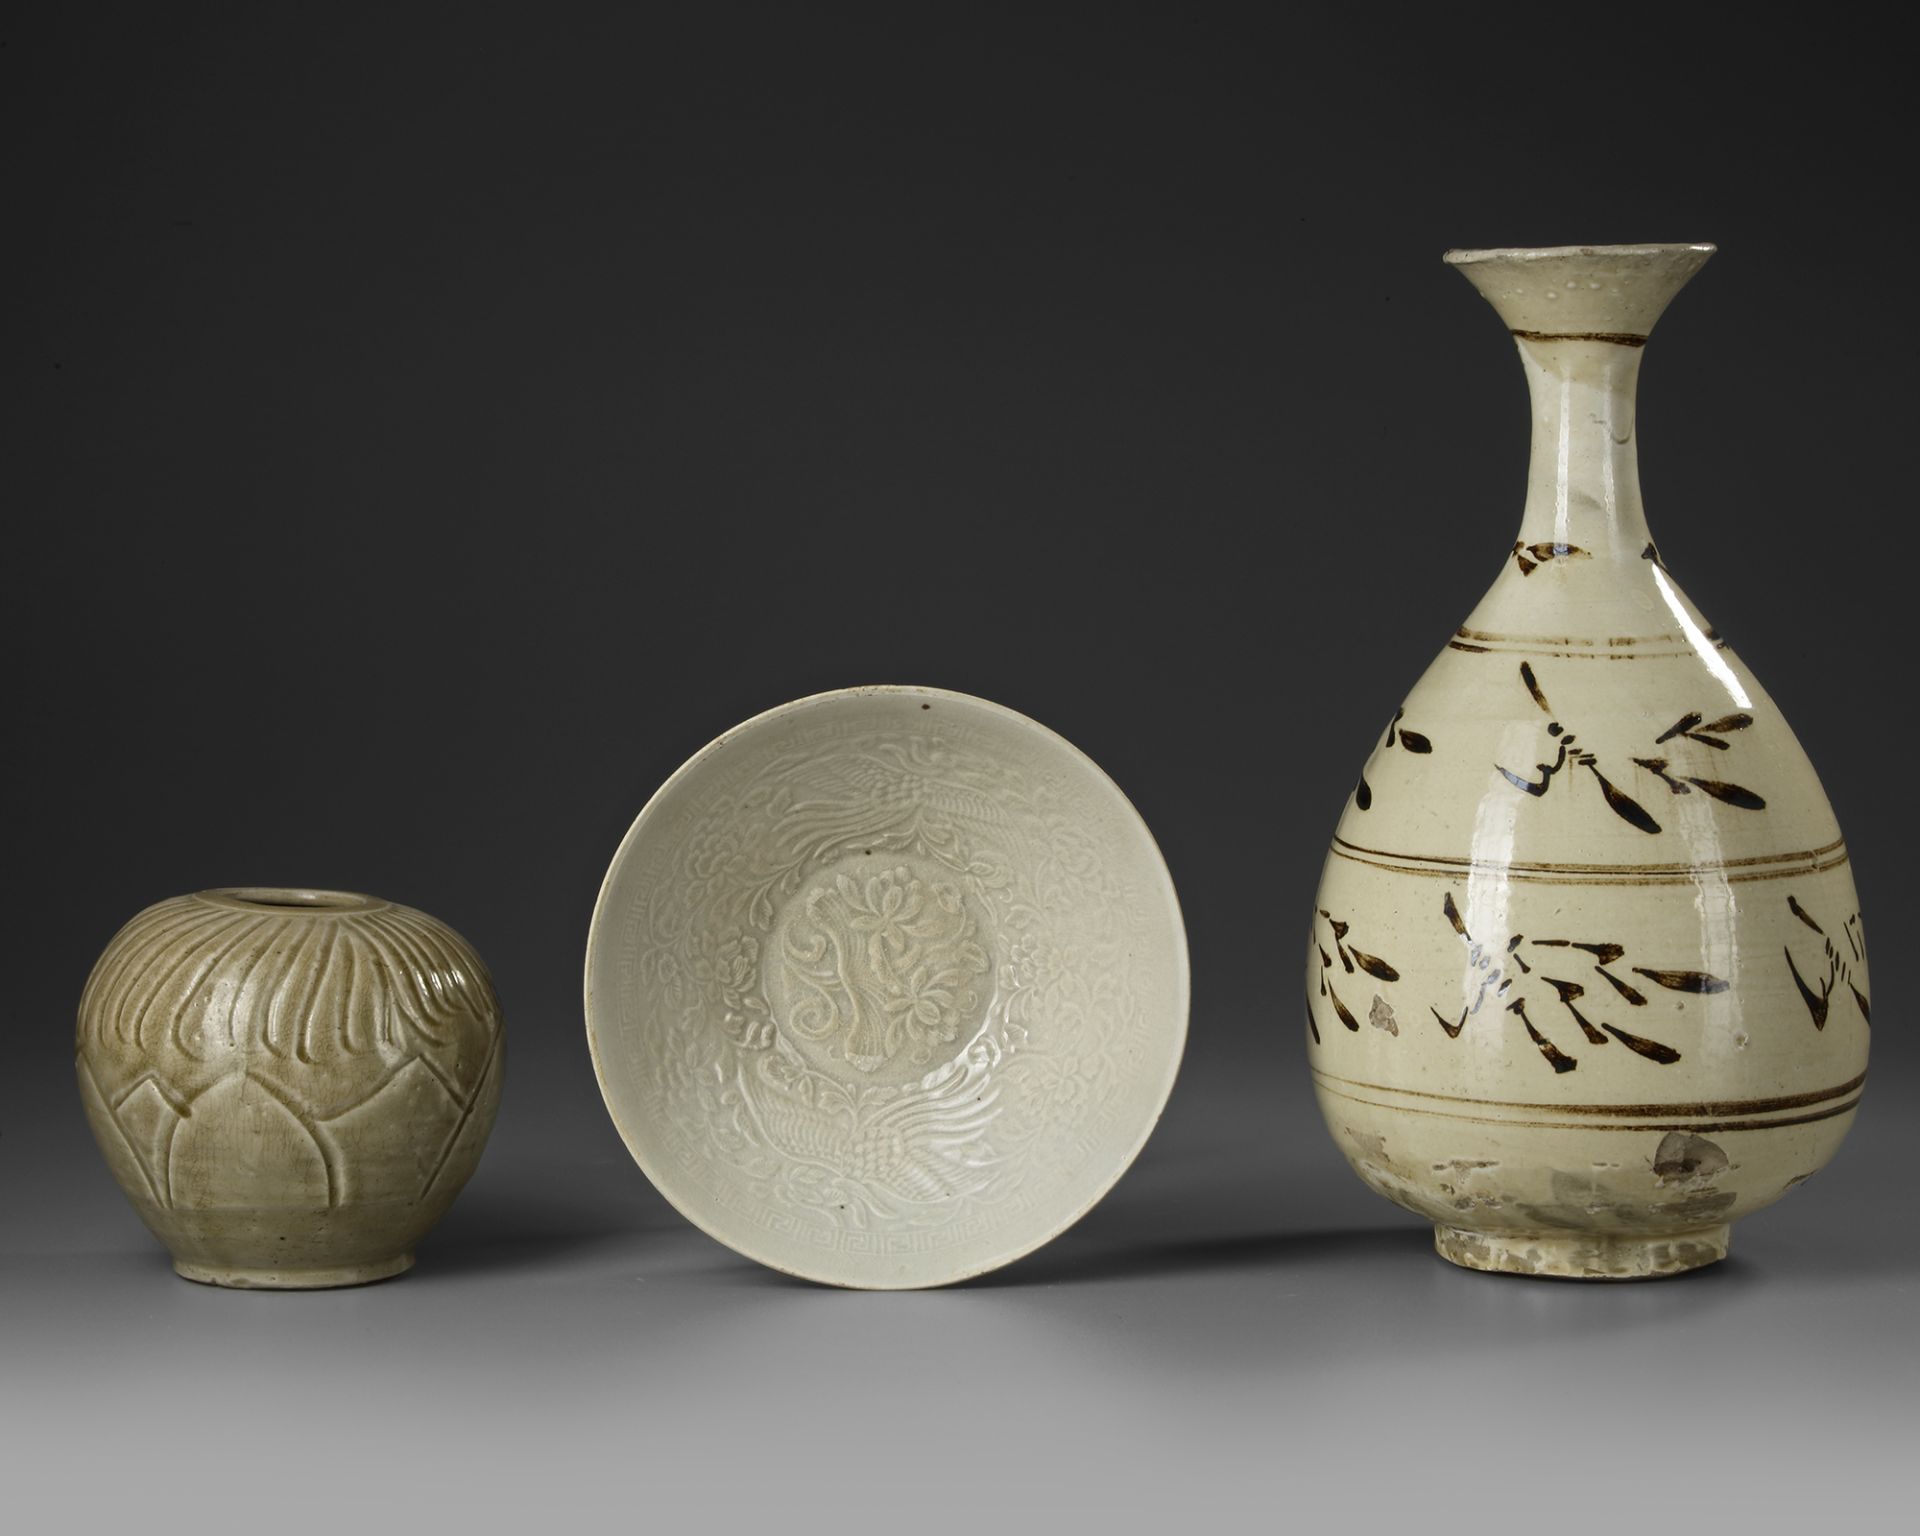 THREE CHINESE WARES IN VARIOUS MATERIALS, FIVE DYNASTIES ( 907-960) /SONG DYNASTY (960-1279)